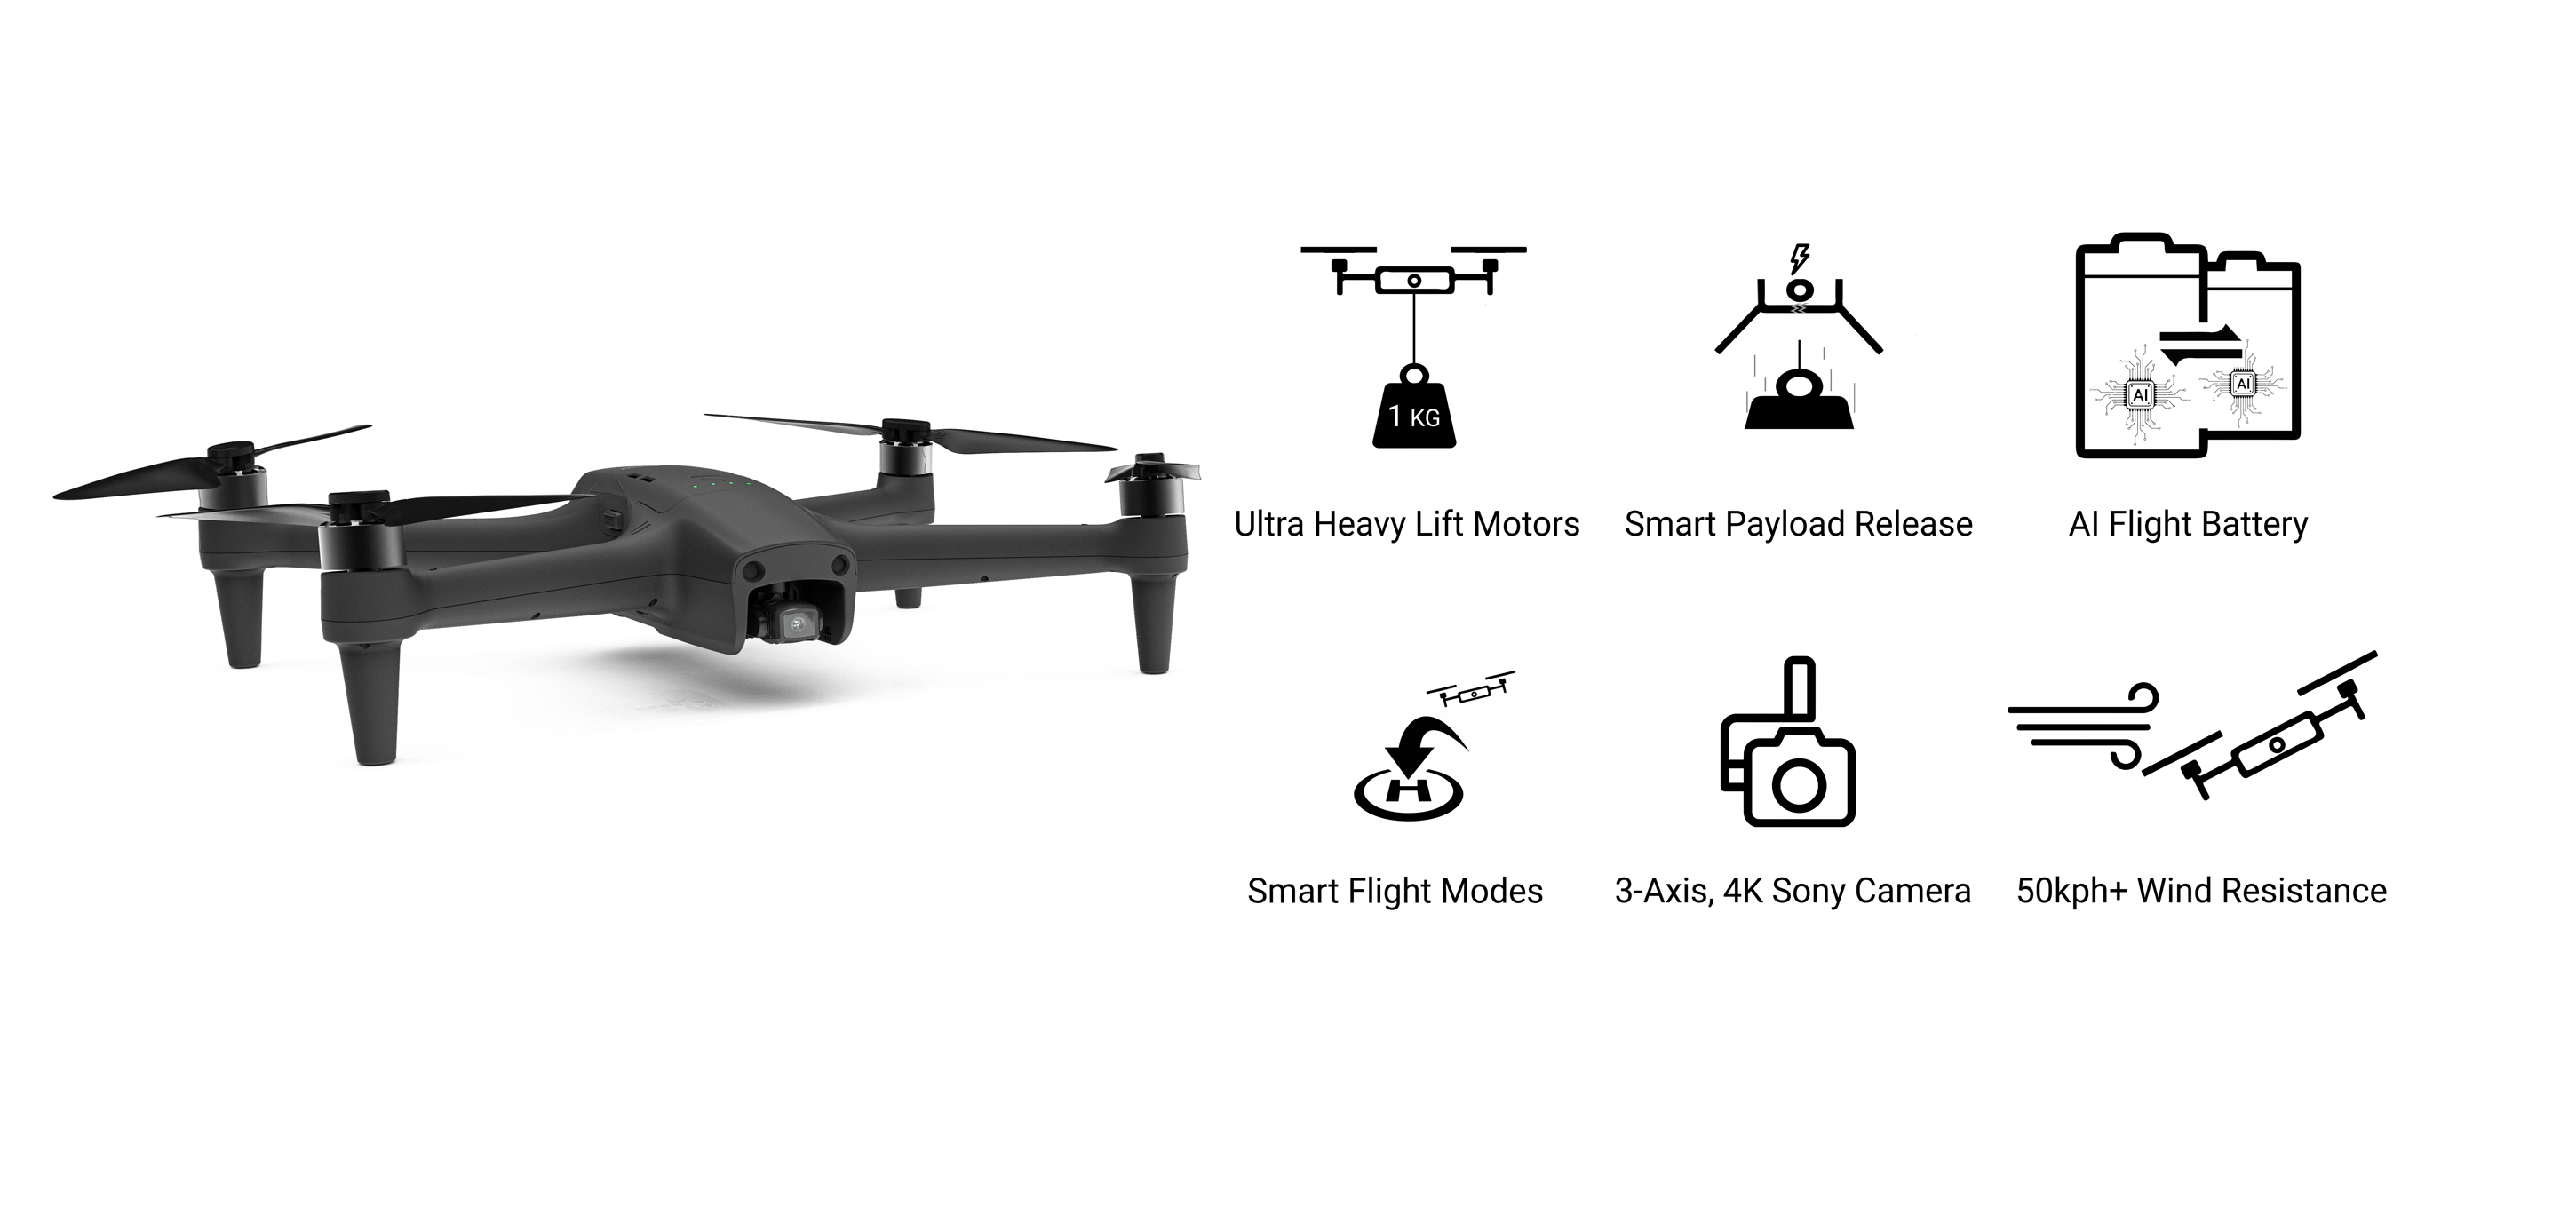 Picture of the Aeroo Pro next to icons showing off some specifications such as: ultra heavy lift motors, smart payload release, AI flight battery, smart flight modes, 3-axis 4K Sony camera and 50kph+ wind resistance